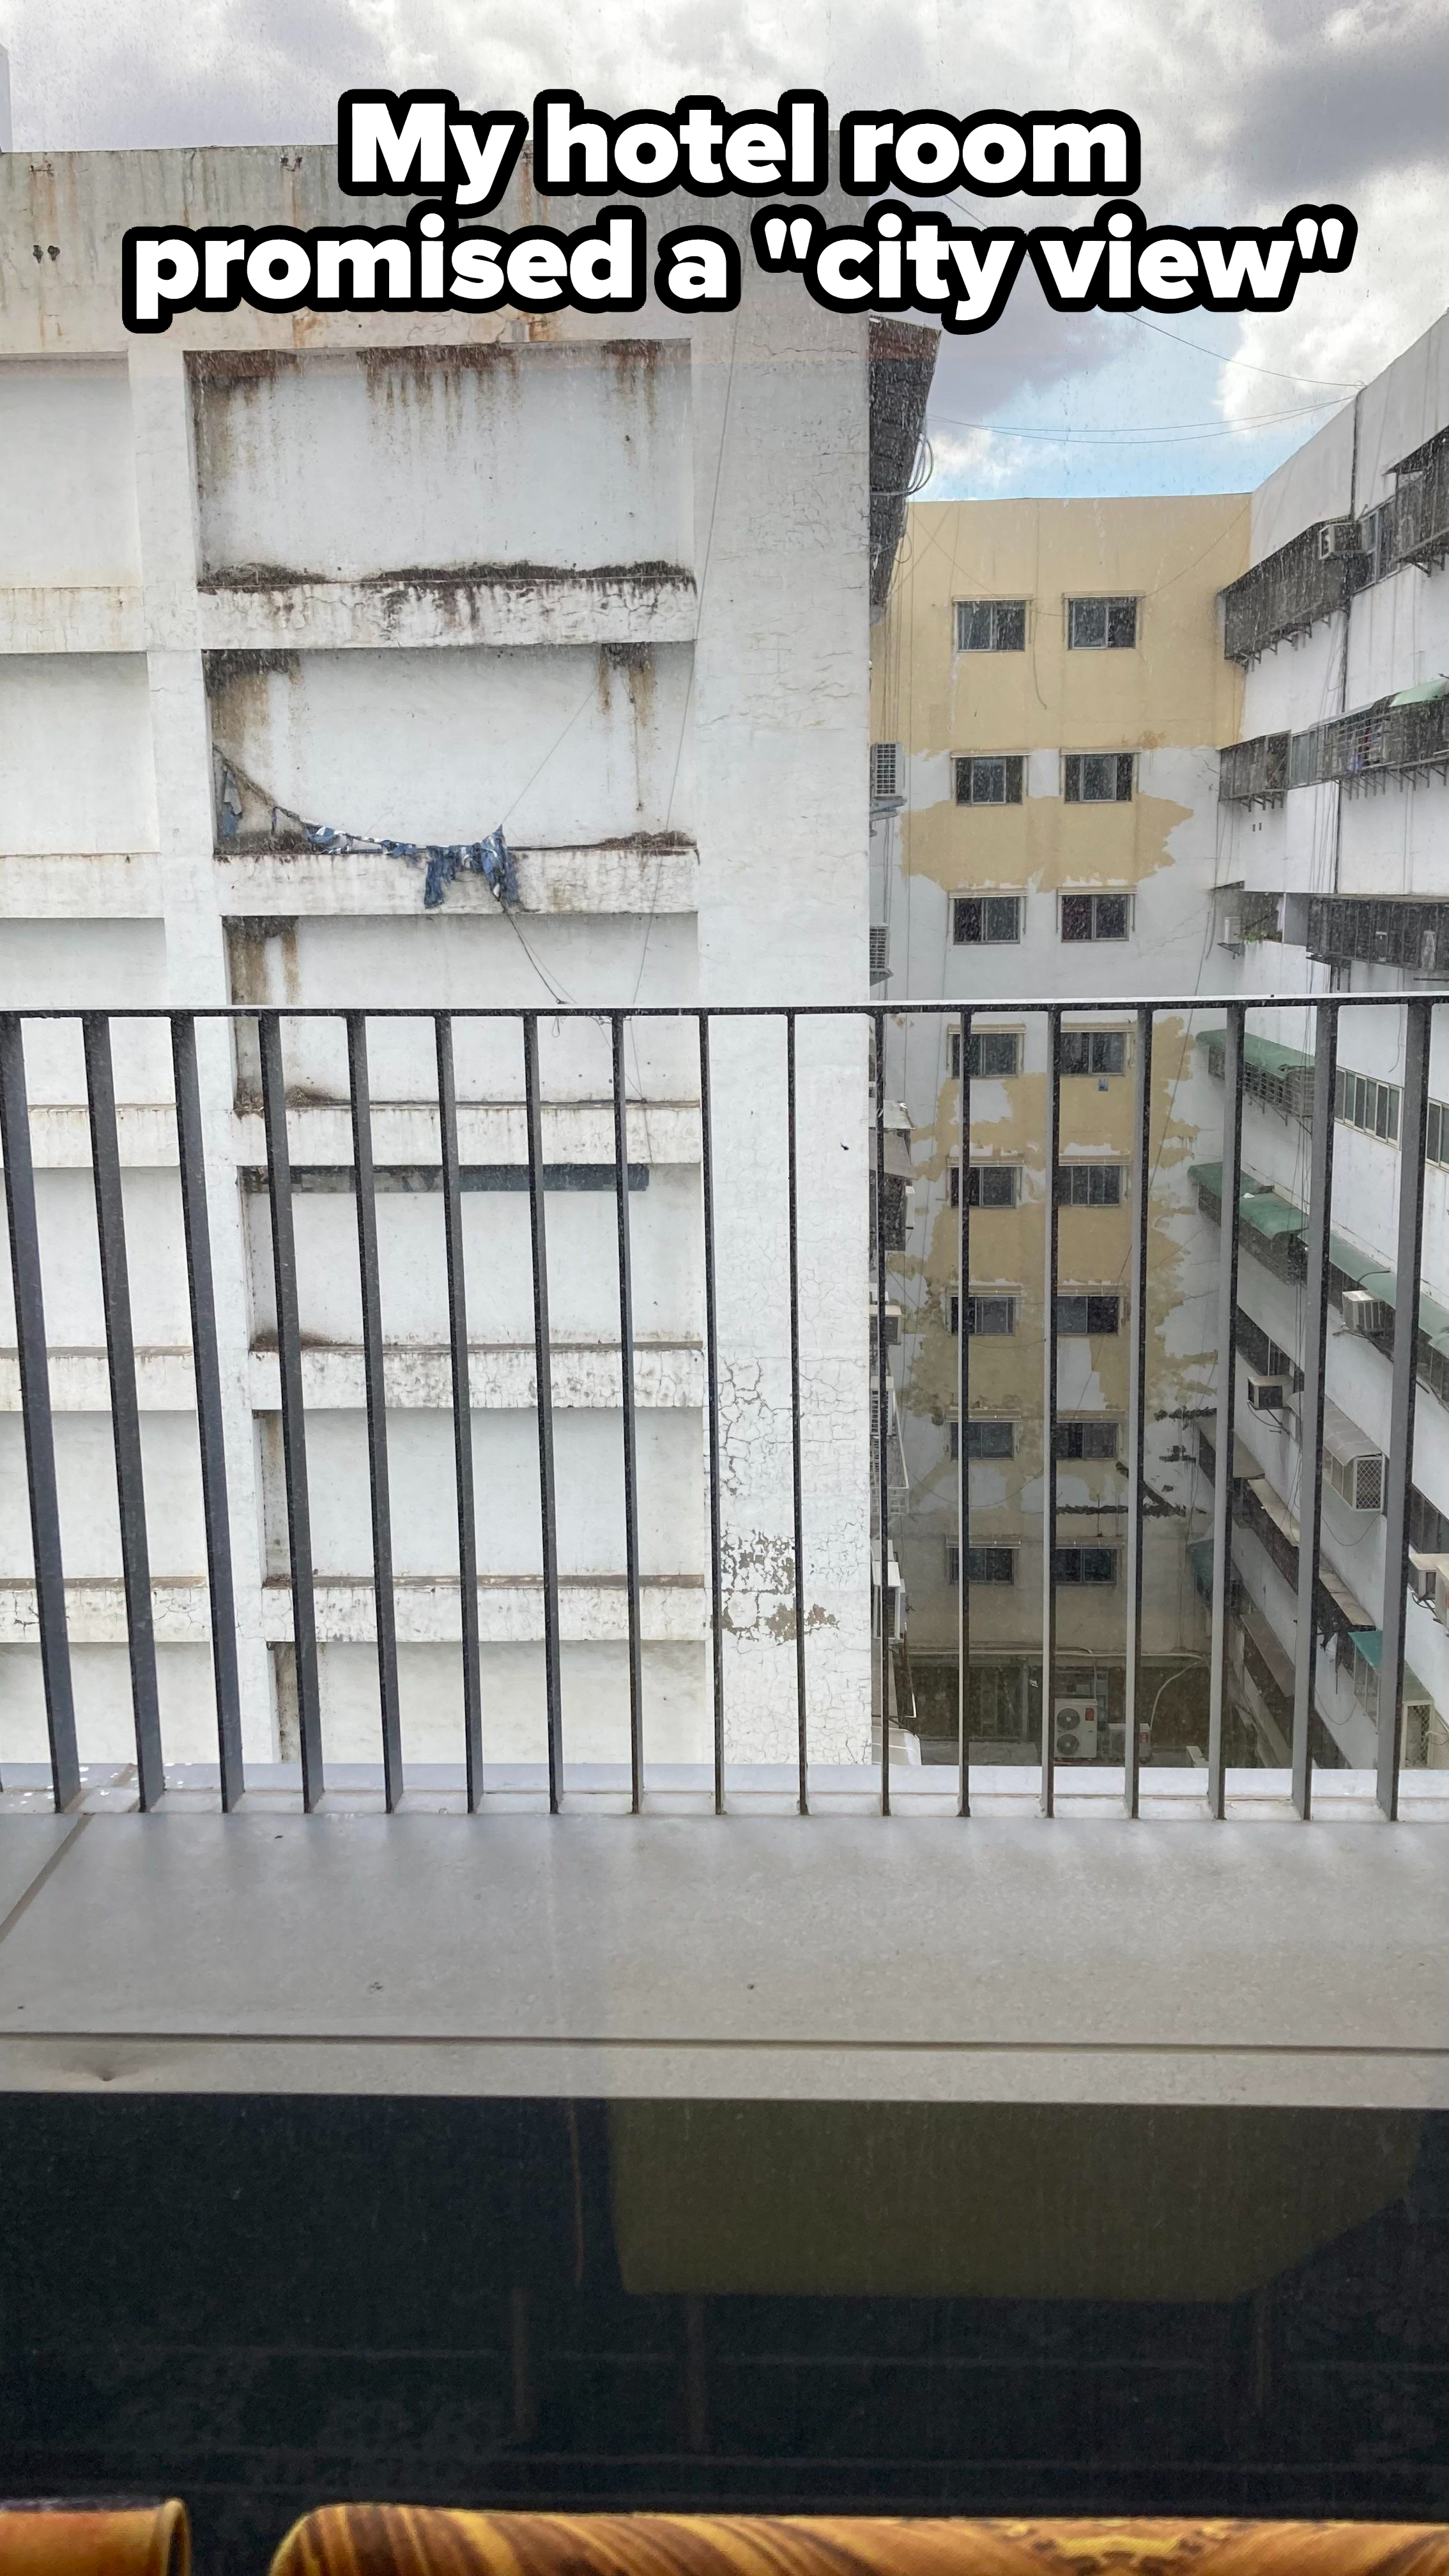 The back of a gray, nondescript, badly painted, boarded-up building seen from a balcony, with the caption &quot;My hotel room promised a &#x27;city view&#x27;&quot;